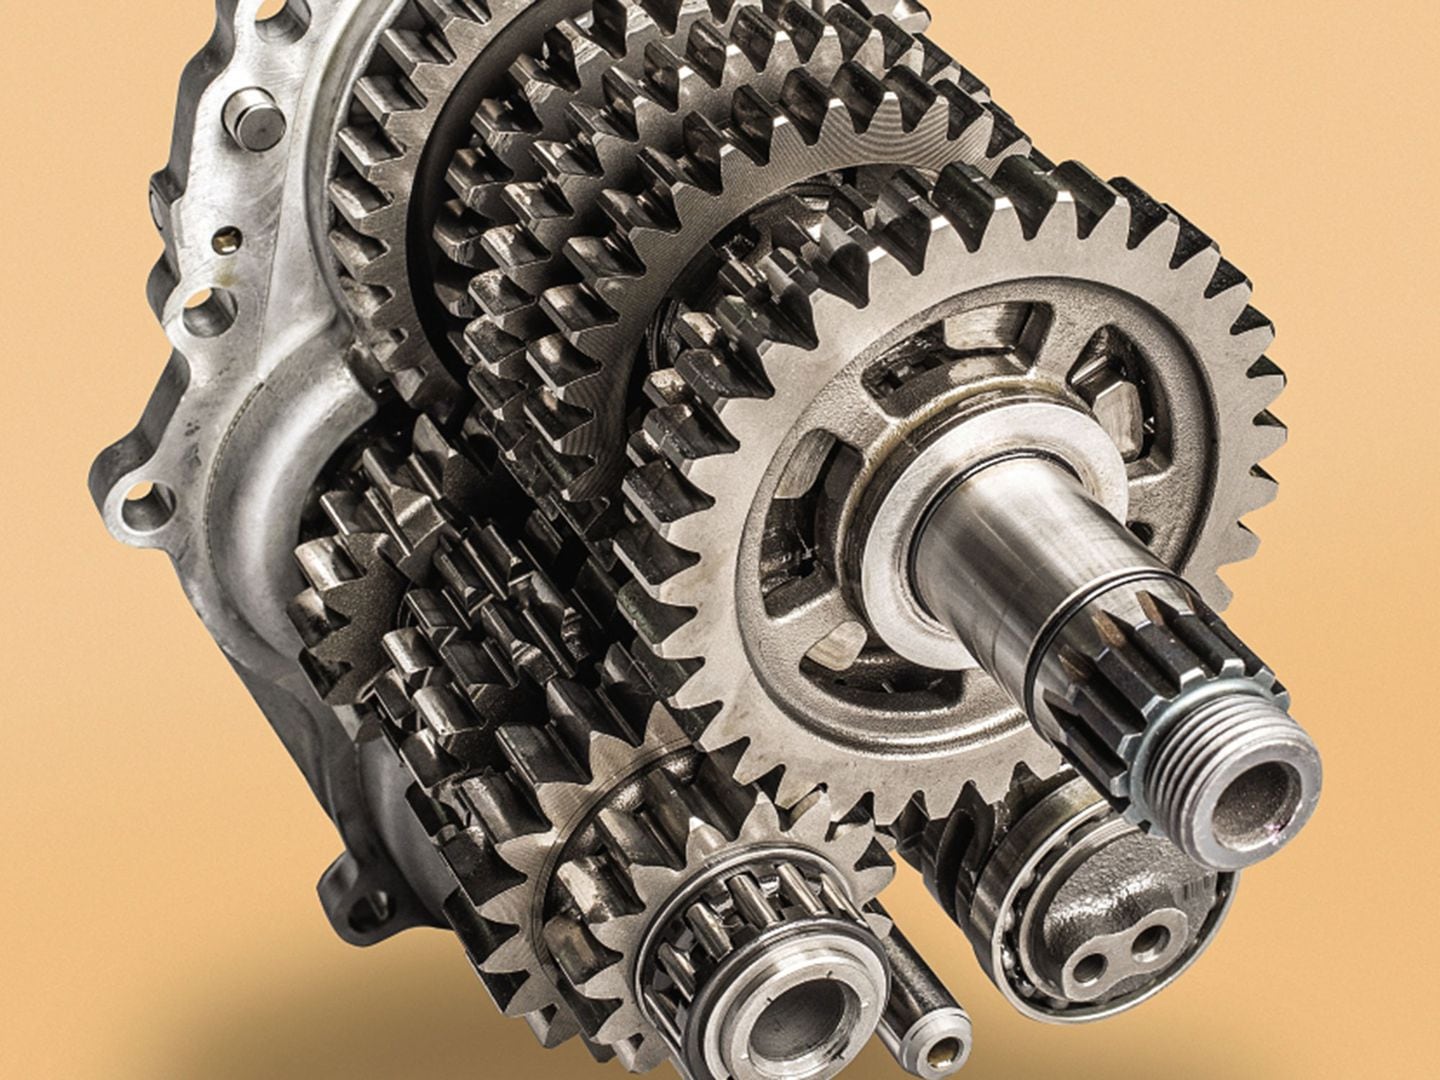 History Of The Motorcycle Transmission | Cycle World